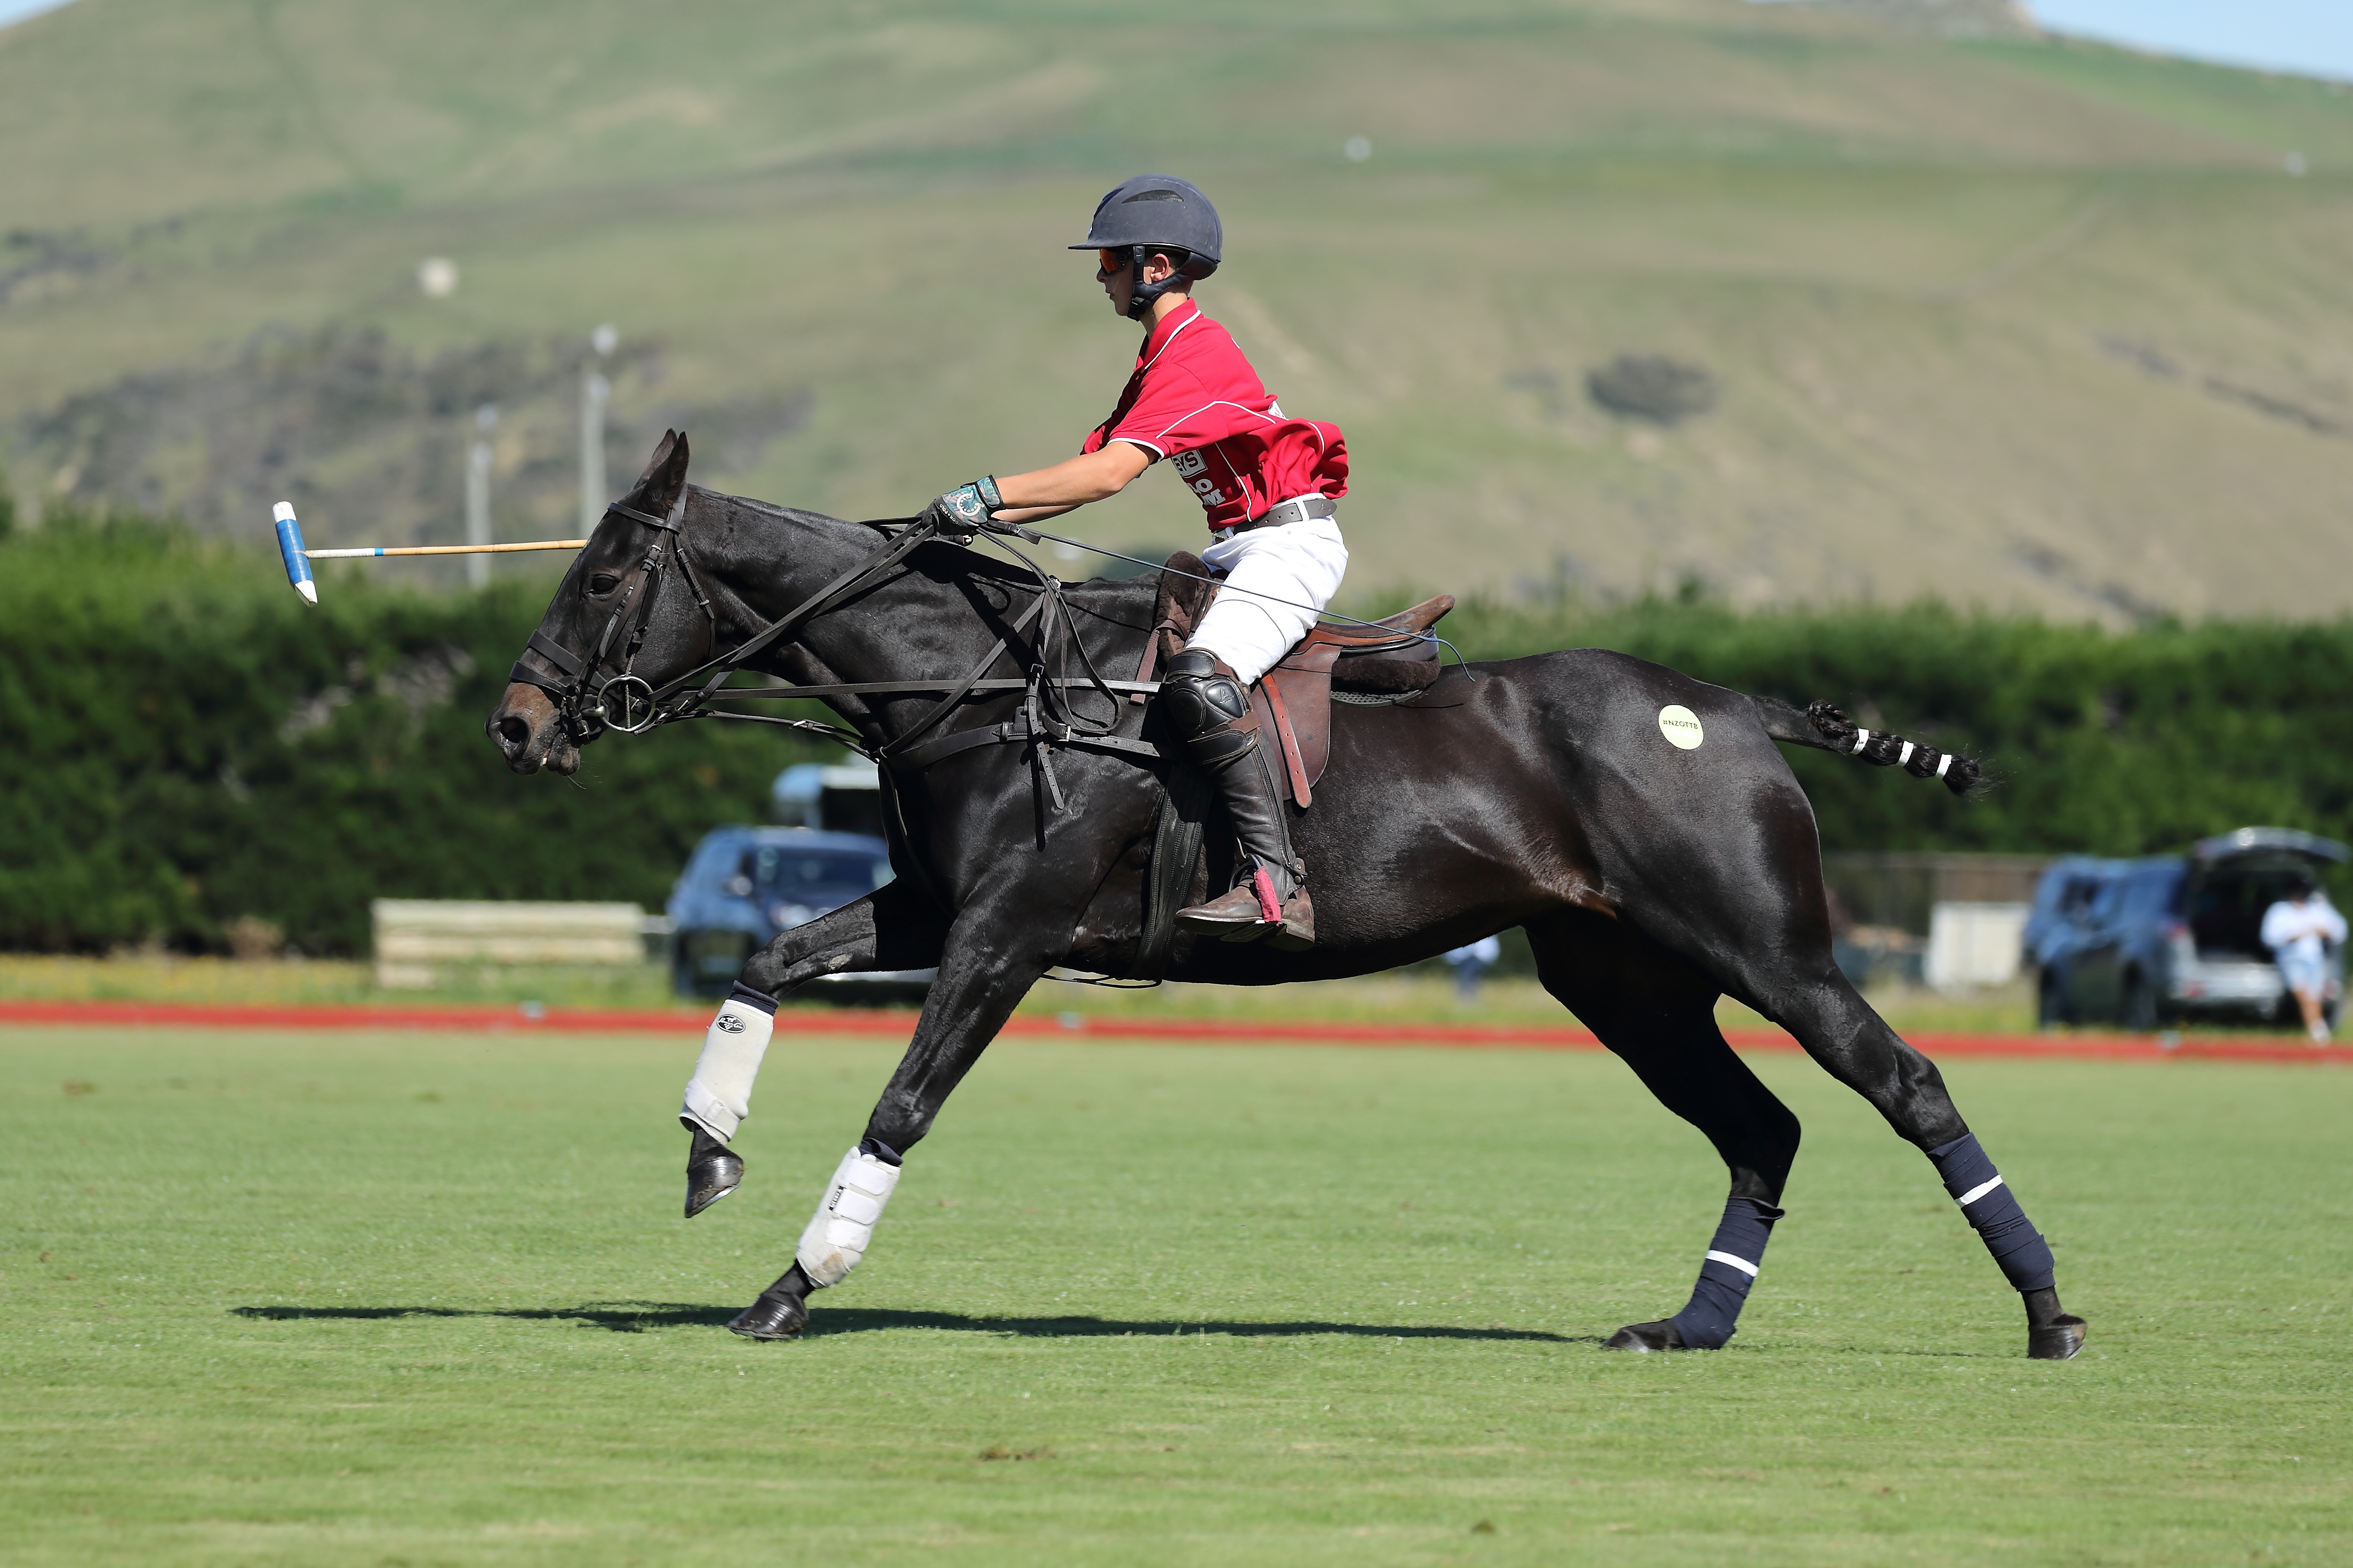 James and Stella in action on the polo field.